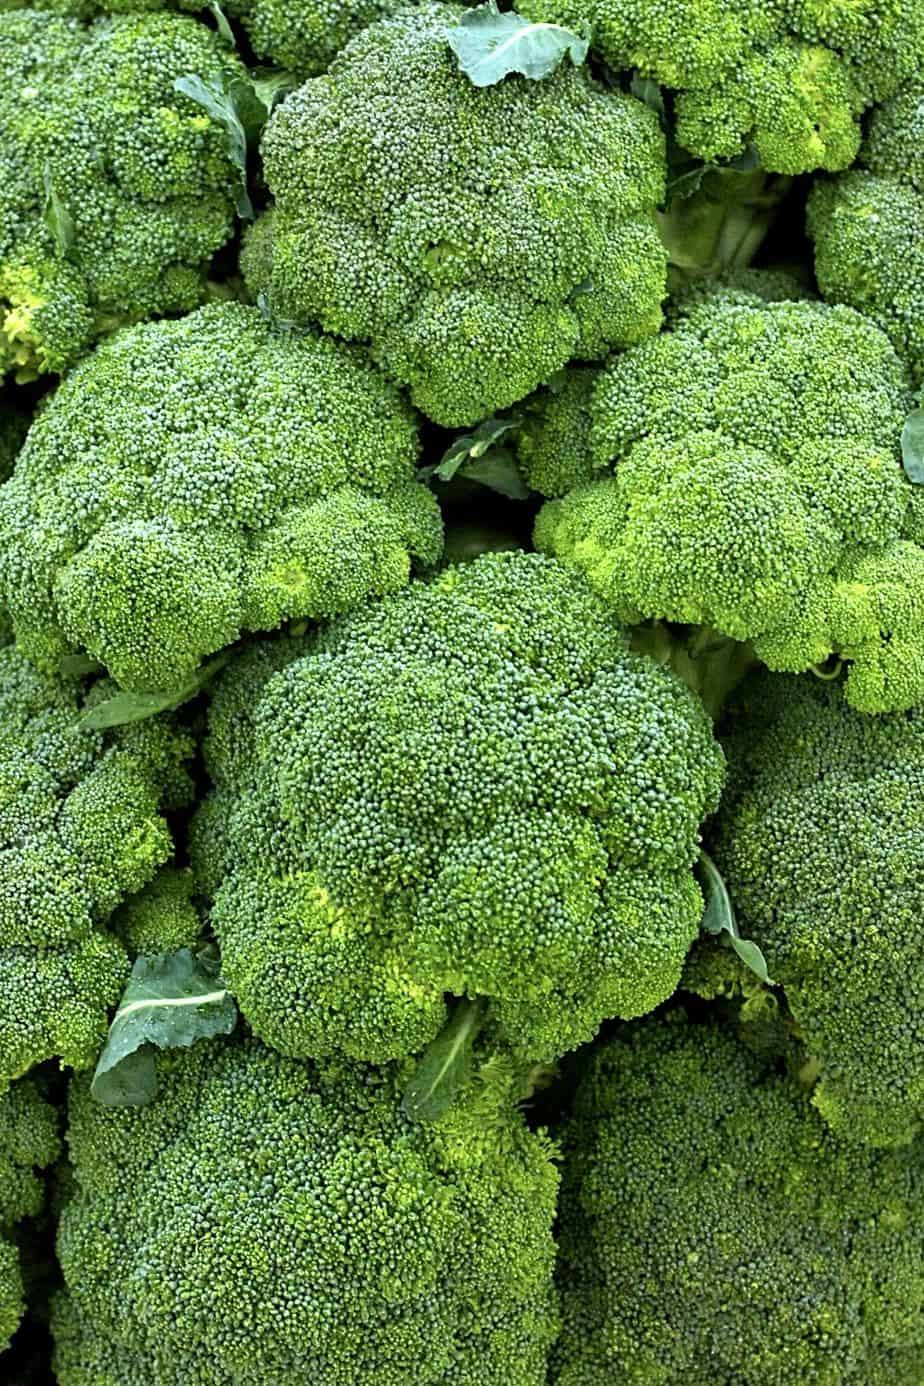 You can grow Broccoli's green and purple varieties in your northeast-facing garden